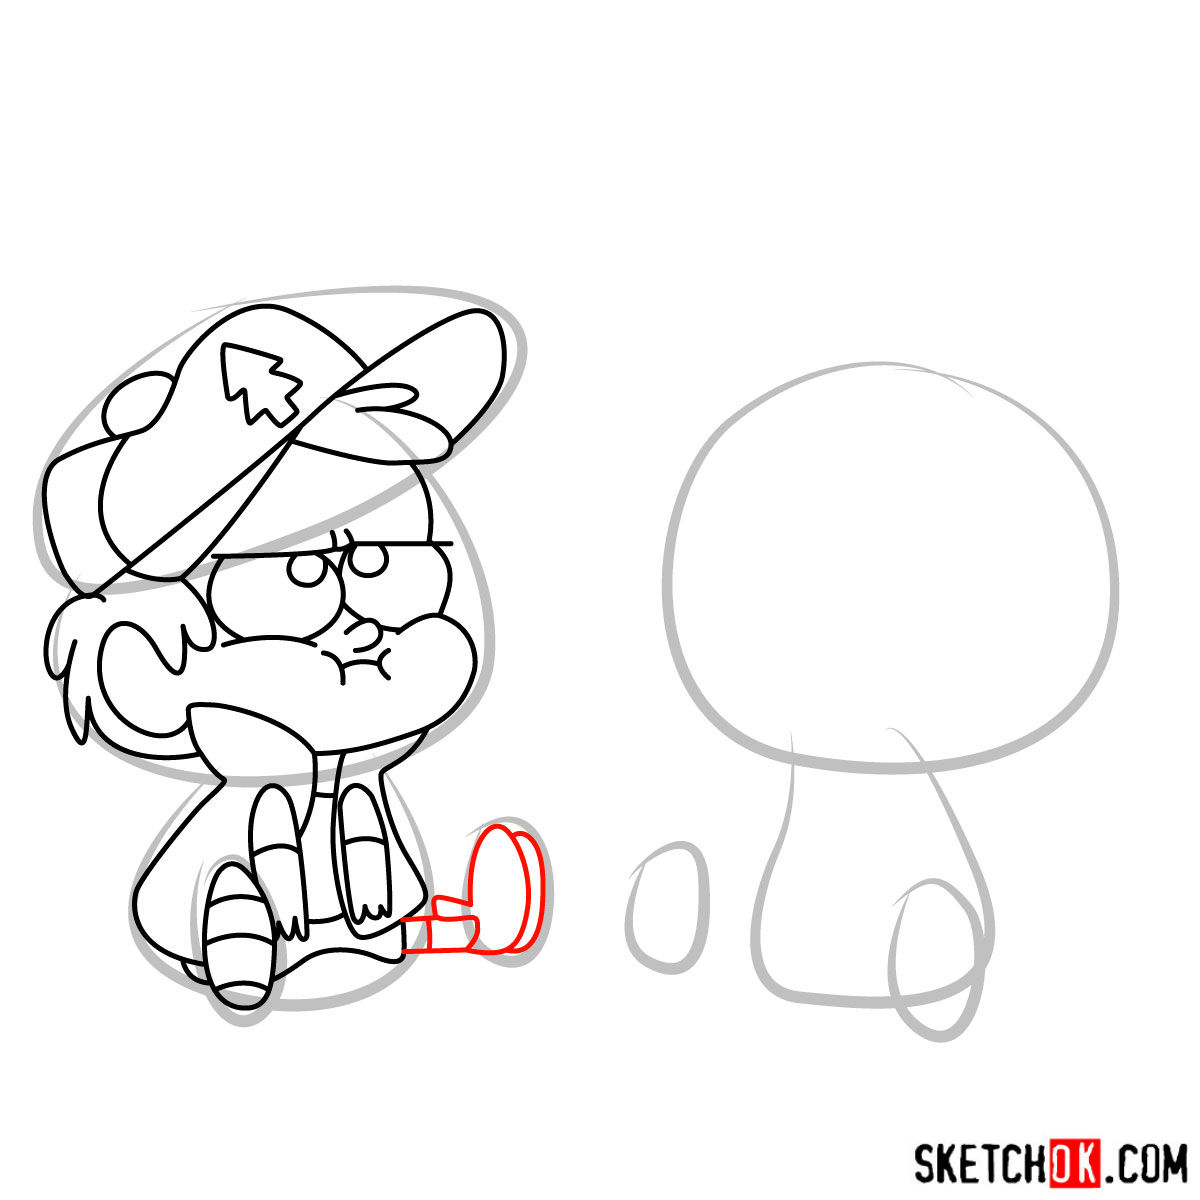 How to draw Dipper and Mabel Pines chibi style - step 08